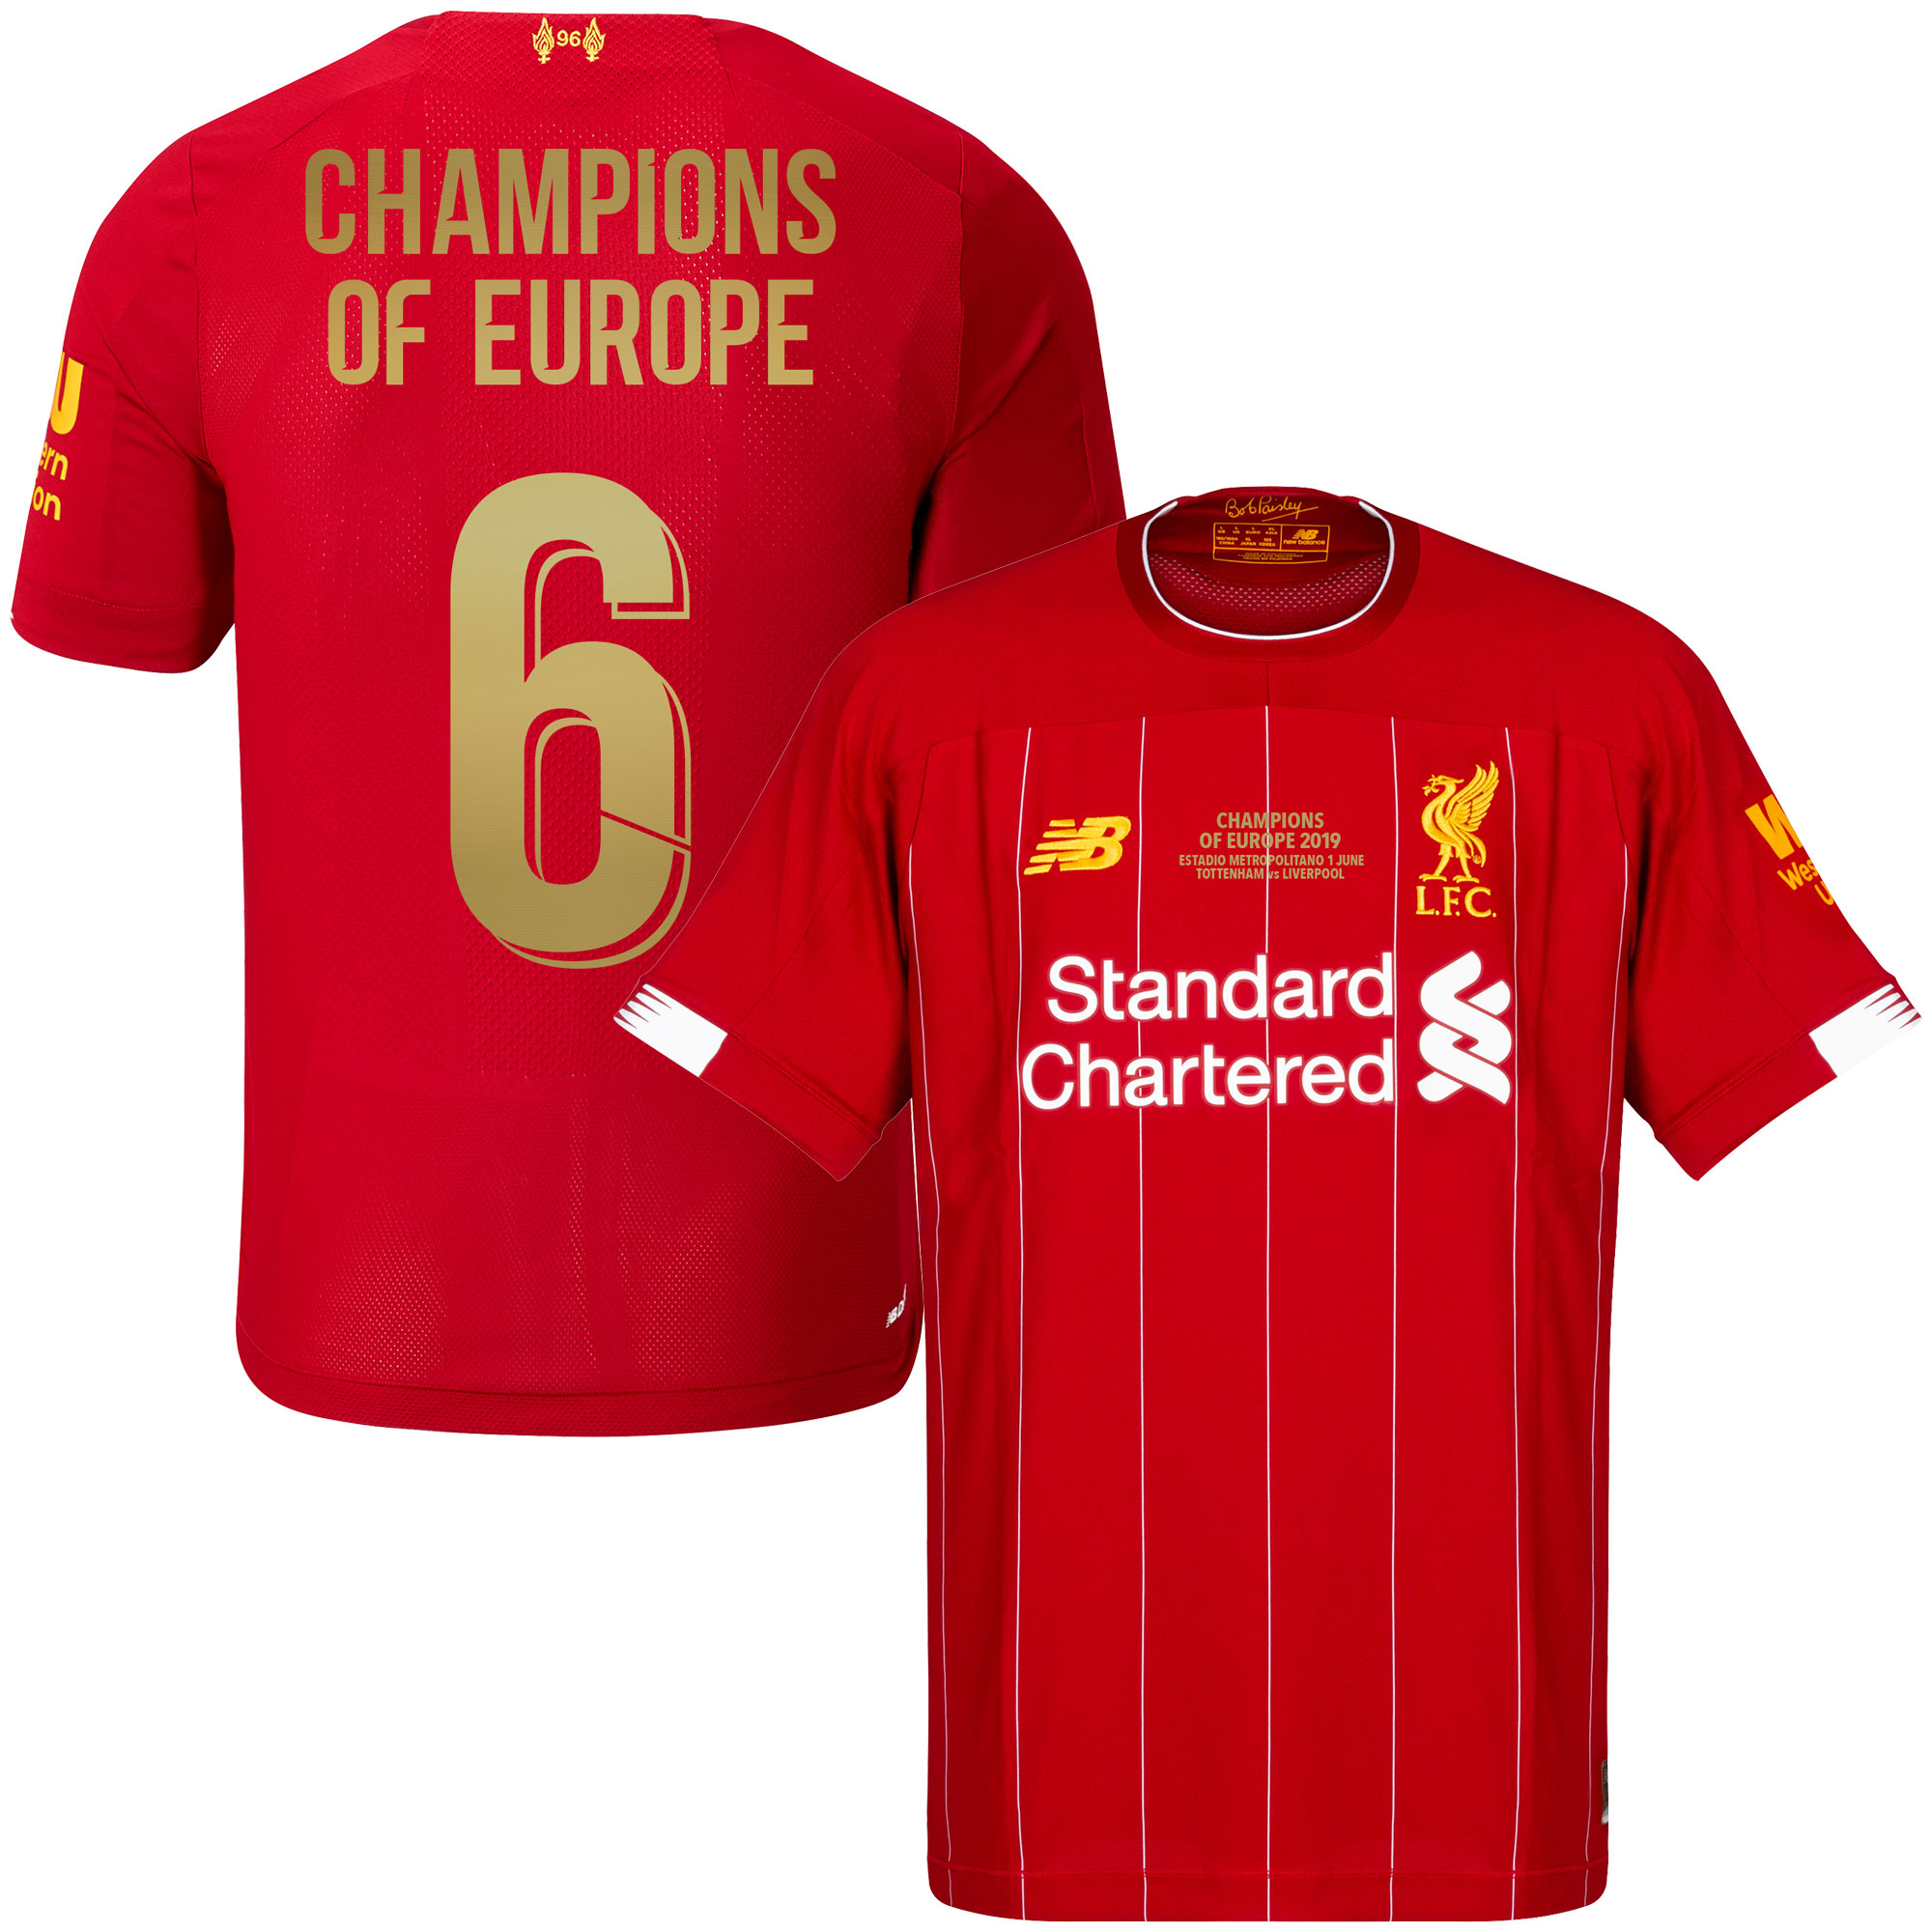 Liverpool Shirt Thuis 2019-2020 + Champions of Europe 6 + Champions League 2019 Transfer